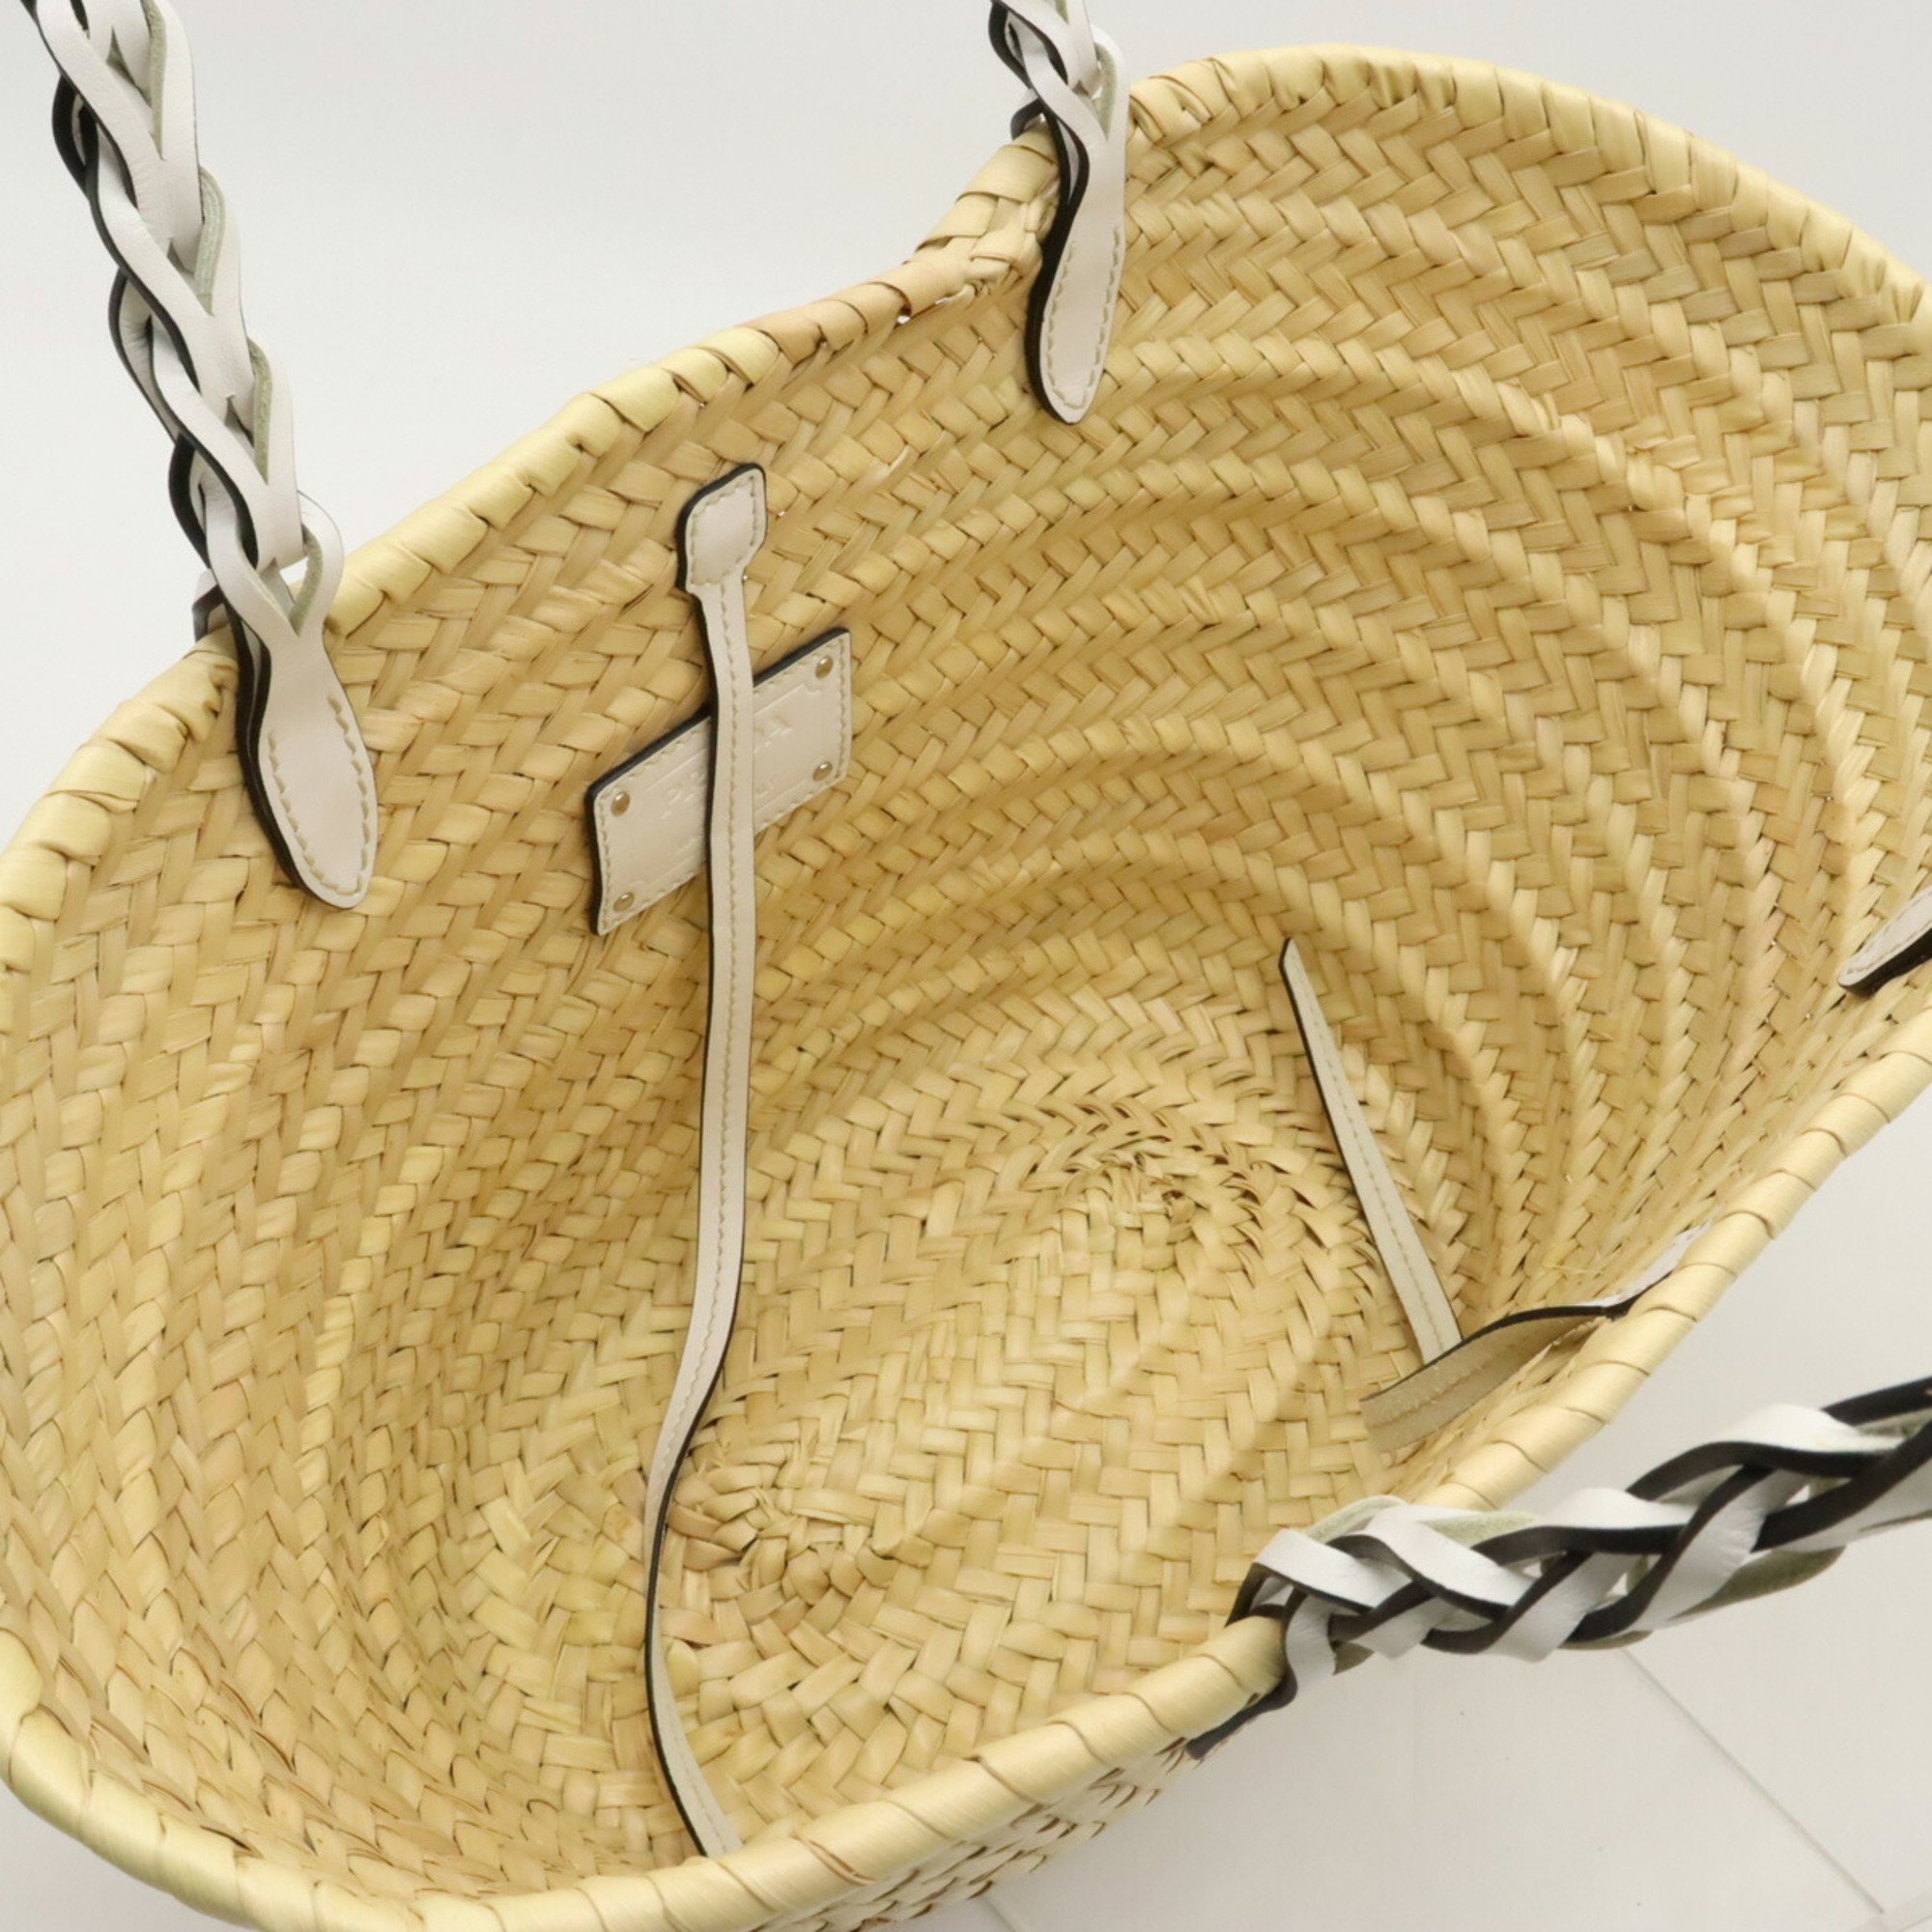 PRADA Prada Woven Palm Leather Tote Bag Basket Straw Natural White Purchased at a Japanese Boutique 1BG314